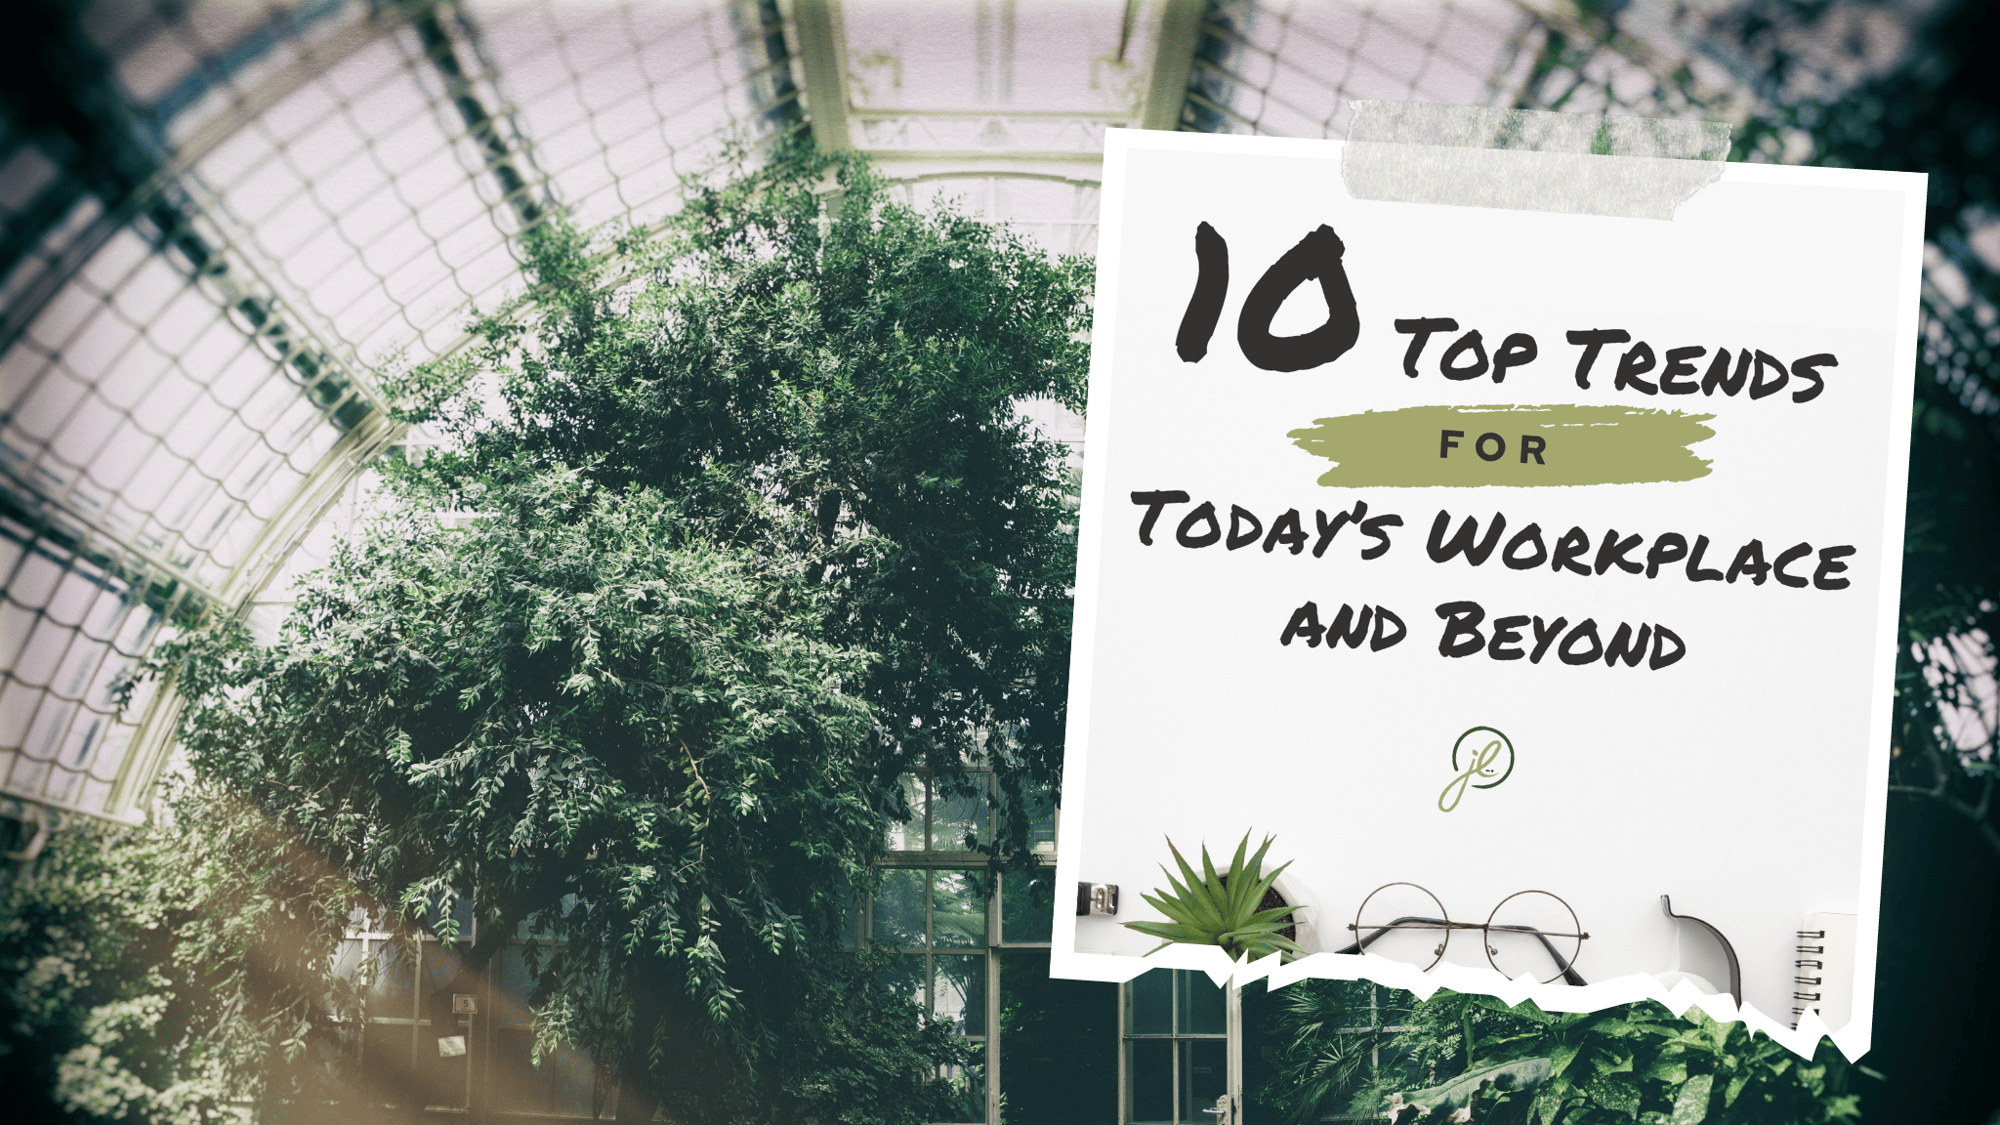 Top trends w greenhouse